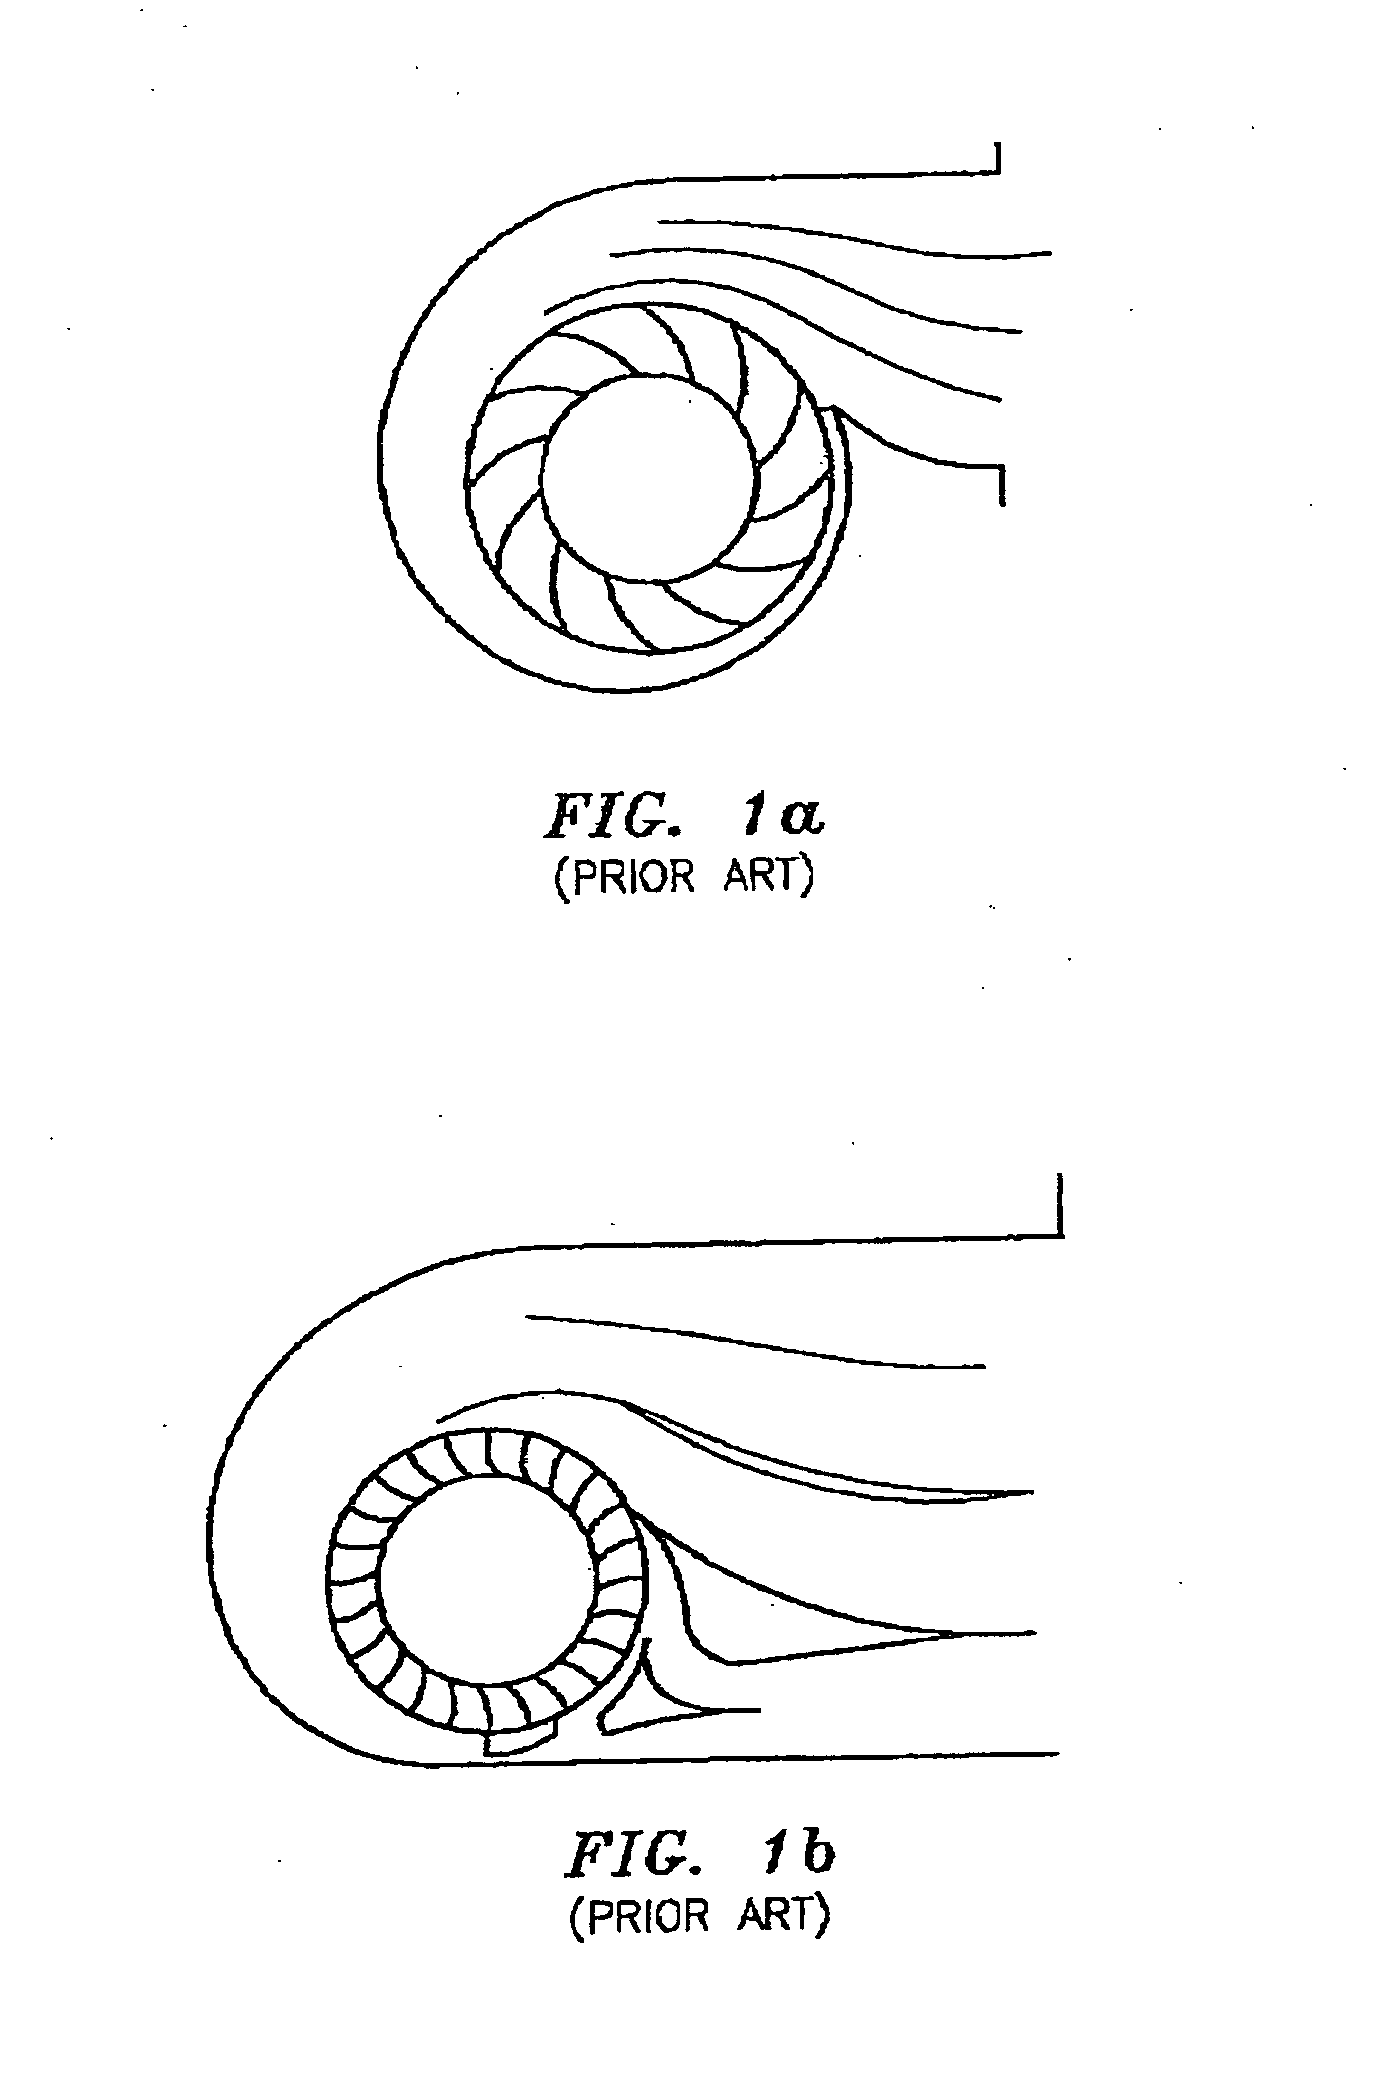 Centrifugal Blower with Partitioned Scroll Diffuser